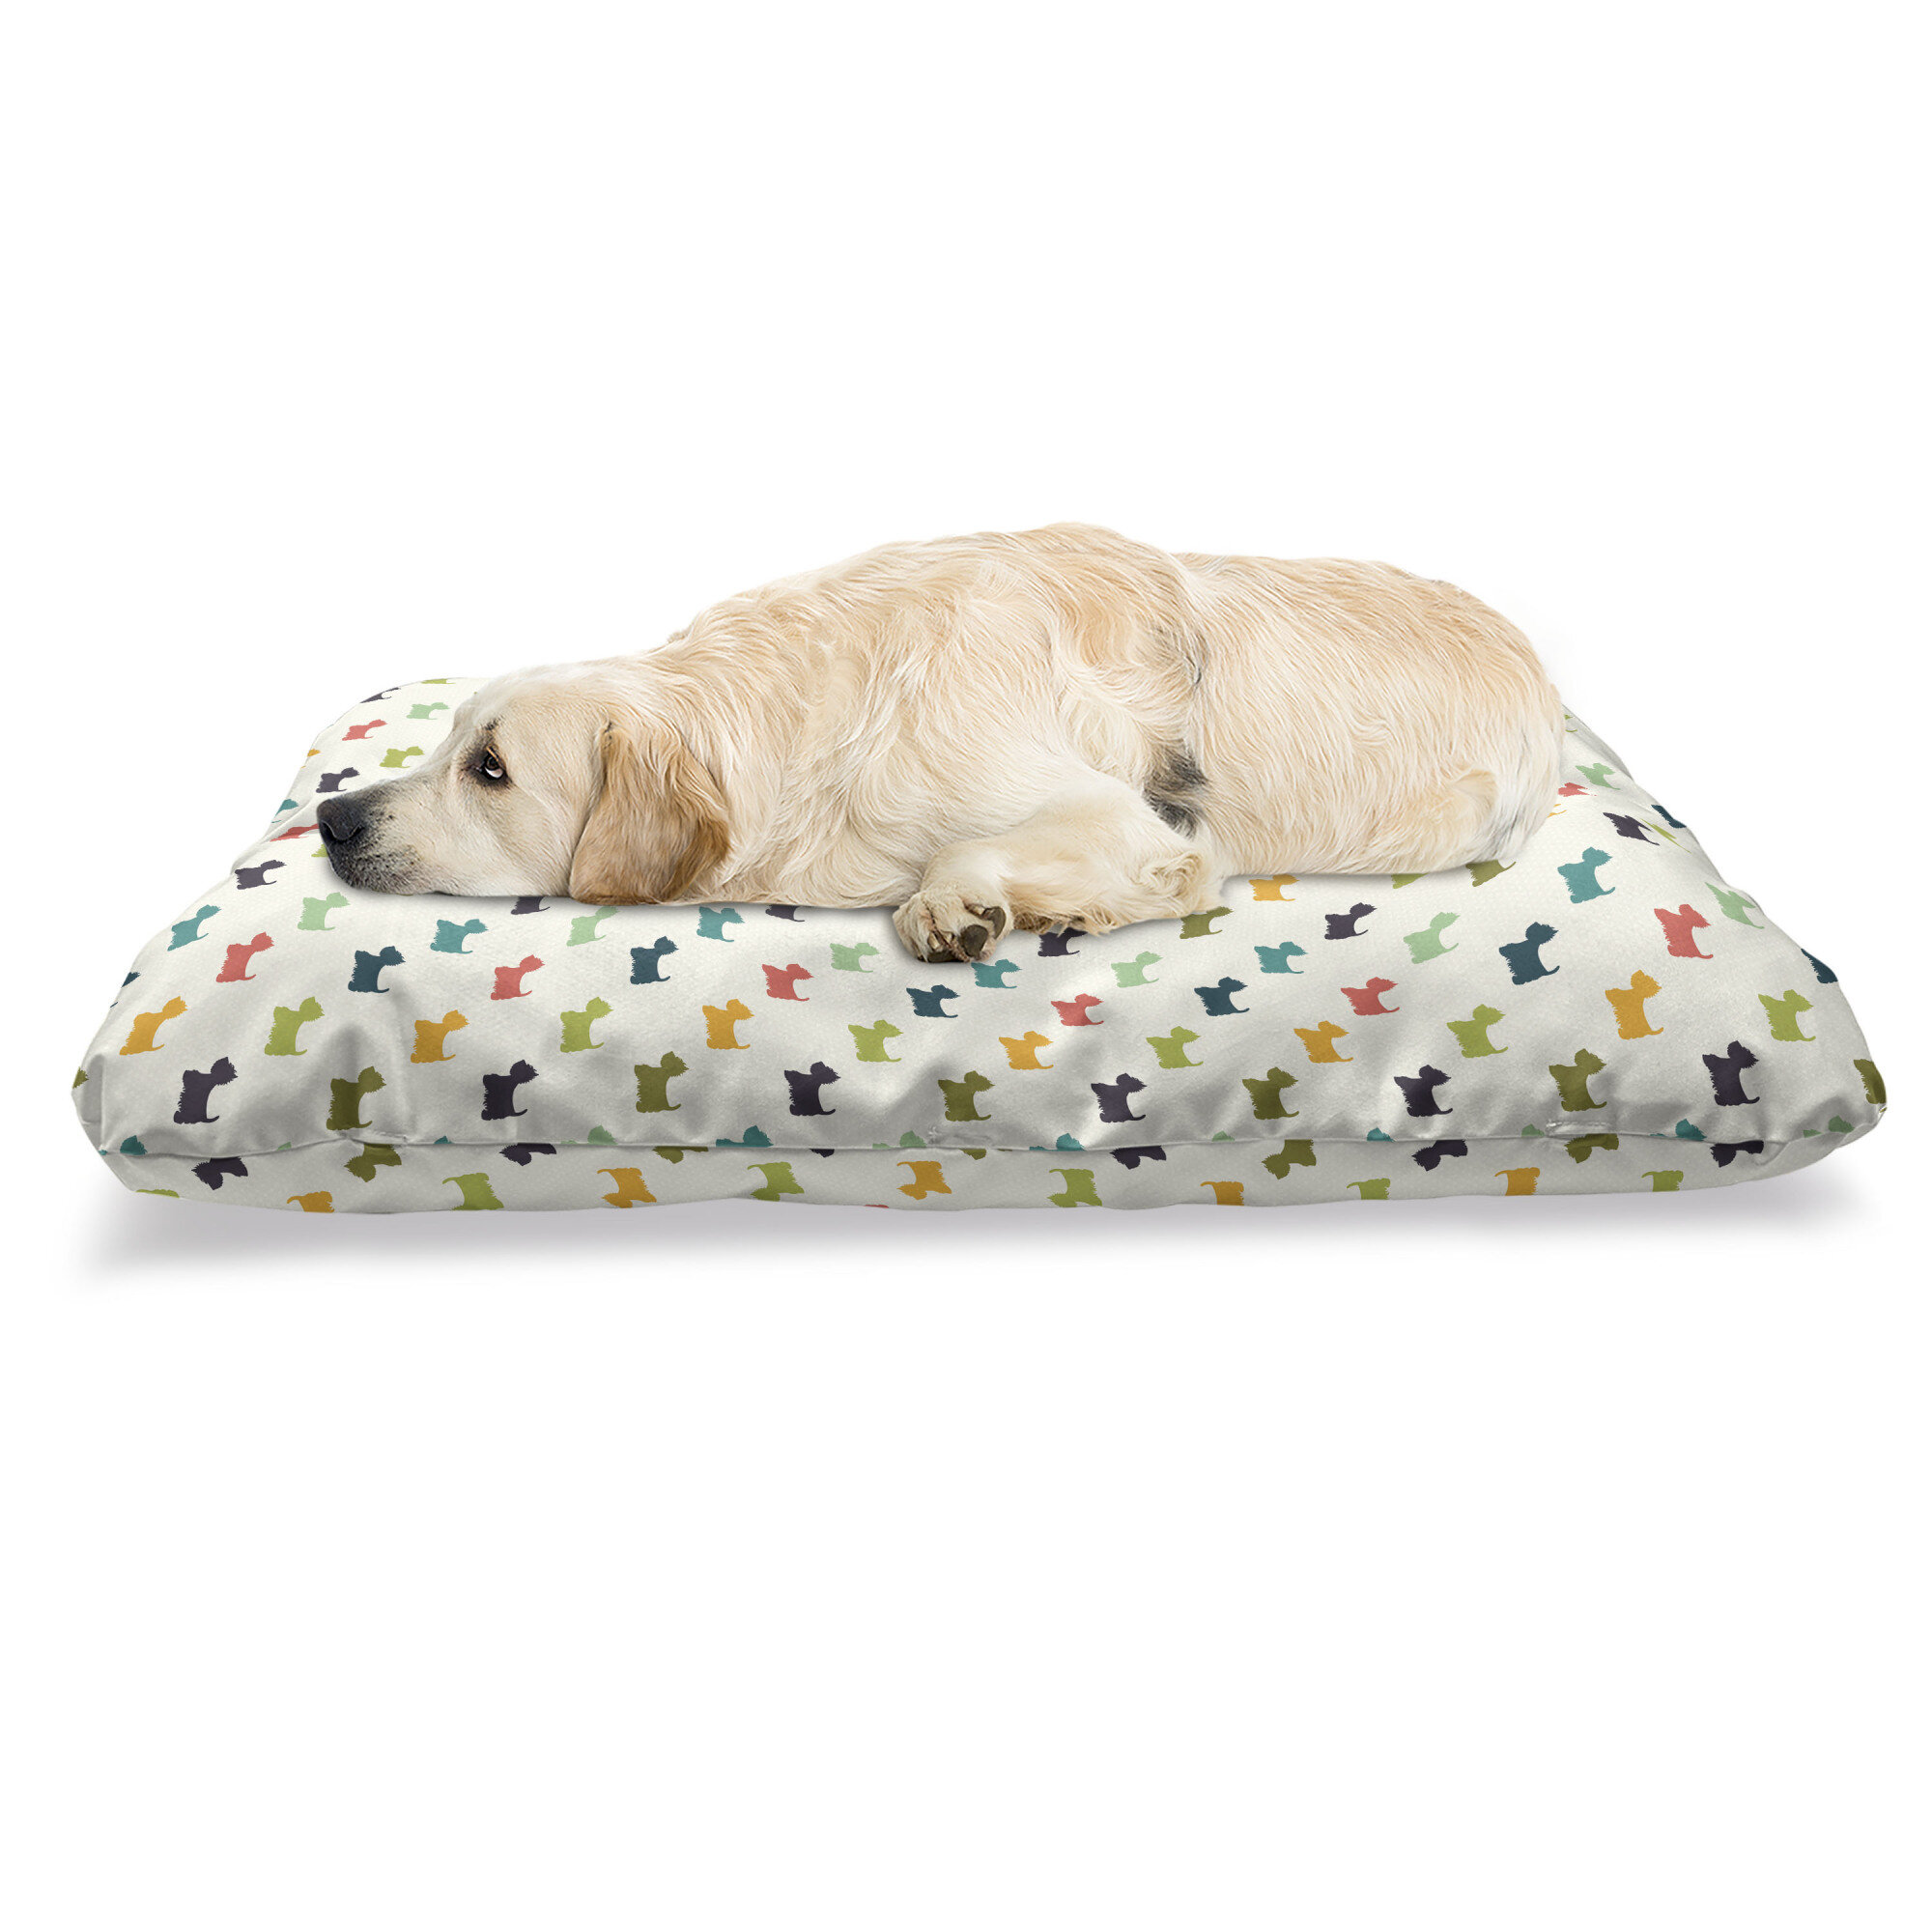 Bless international Ambesonne Dog Lover Pet Bed, Colorful Scottish